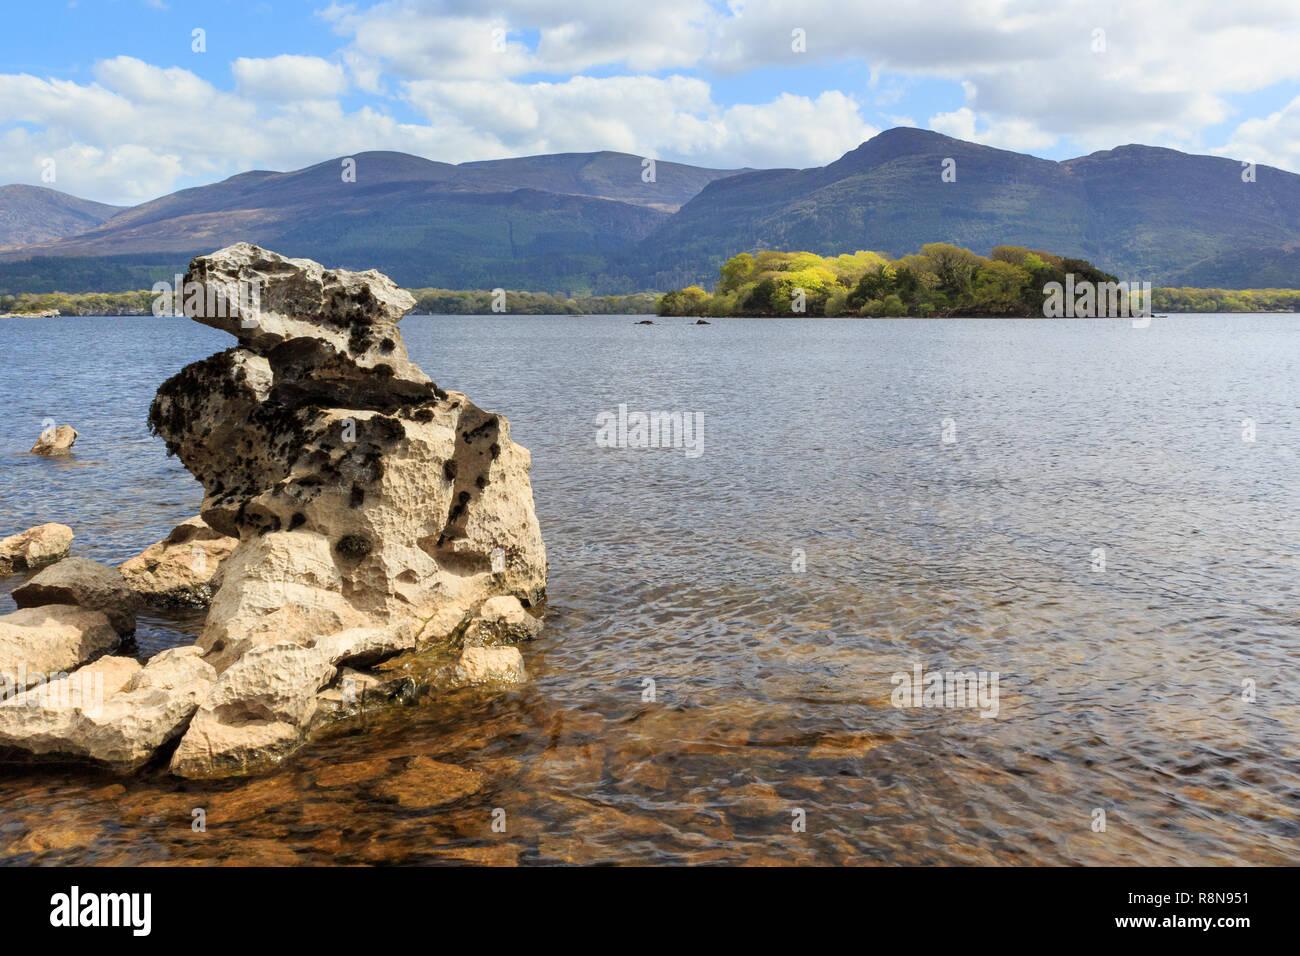 Looking south from Ross Island on the shore of Lough Leane towards Torc Mountain in Killarney National Park, County Kerry, Ireland Stock Photo